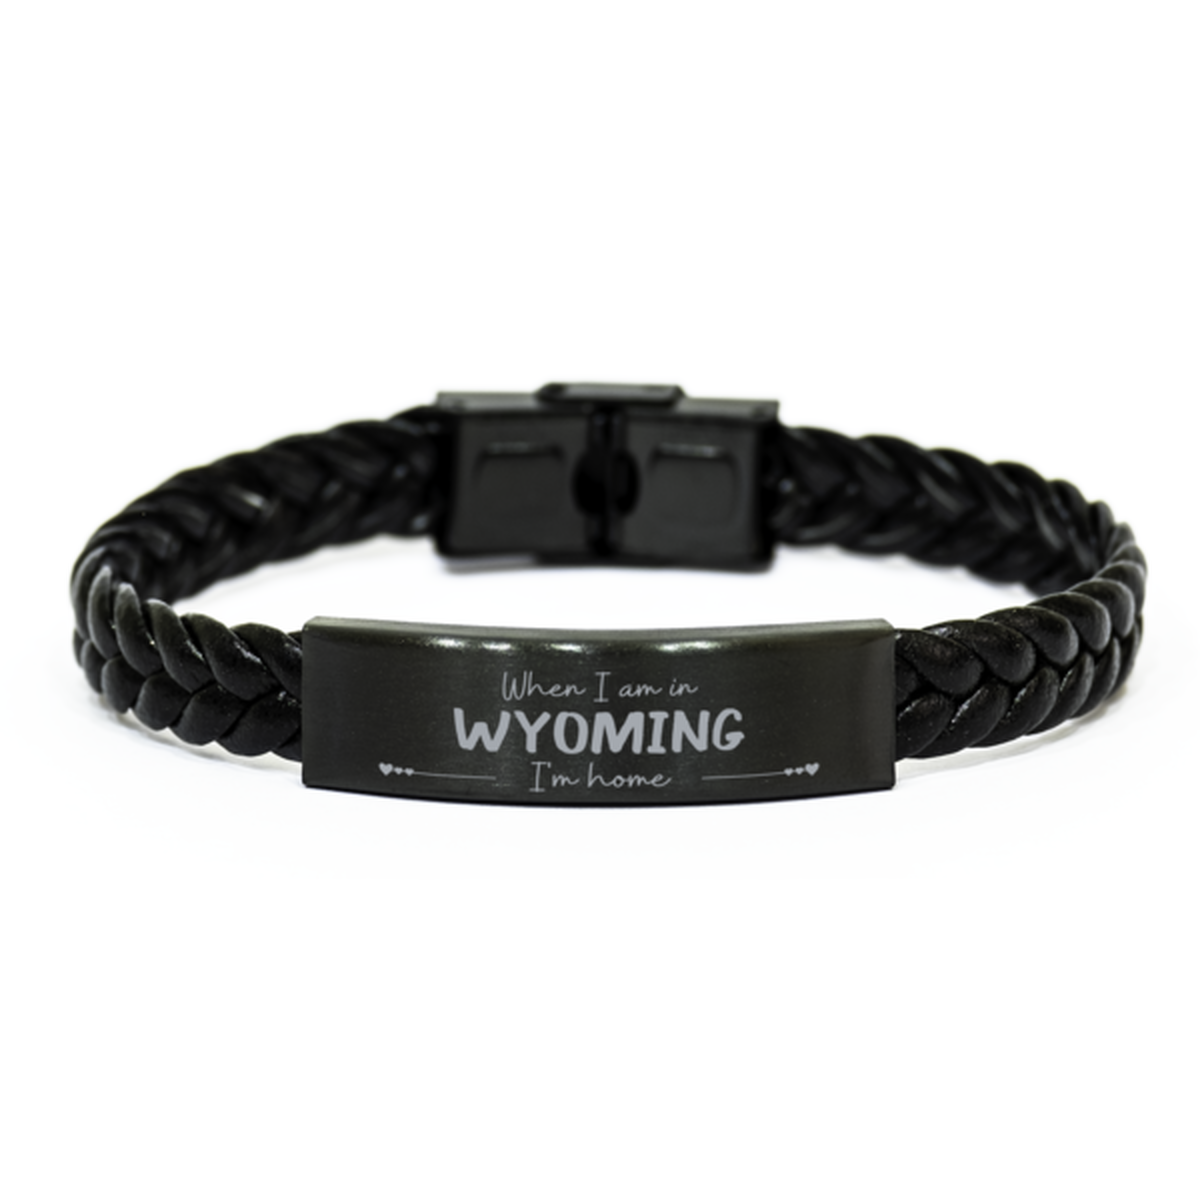 When I am in Wyoming I'm home Braided Leather Bracelet, Cheap Gifts For Wyoming, State Wyoming Birthday Gifts for Friends Coworker